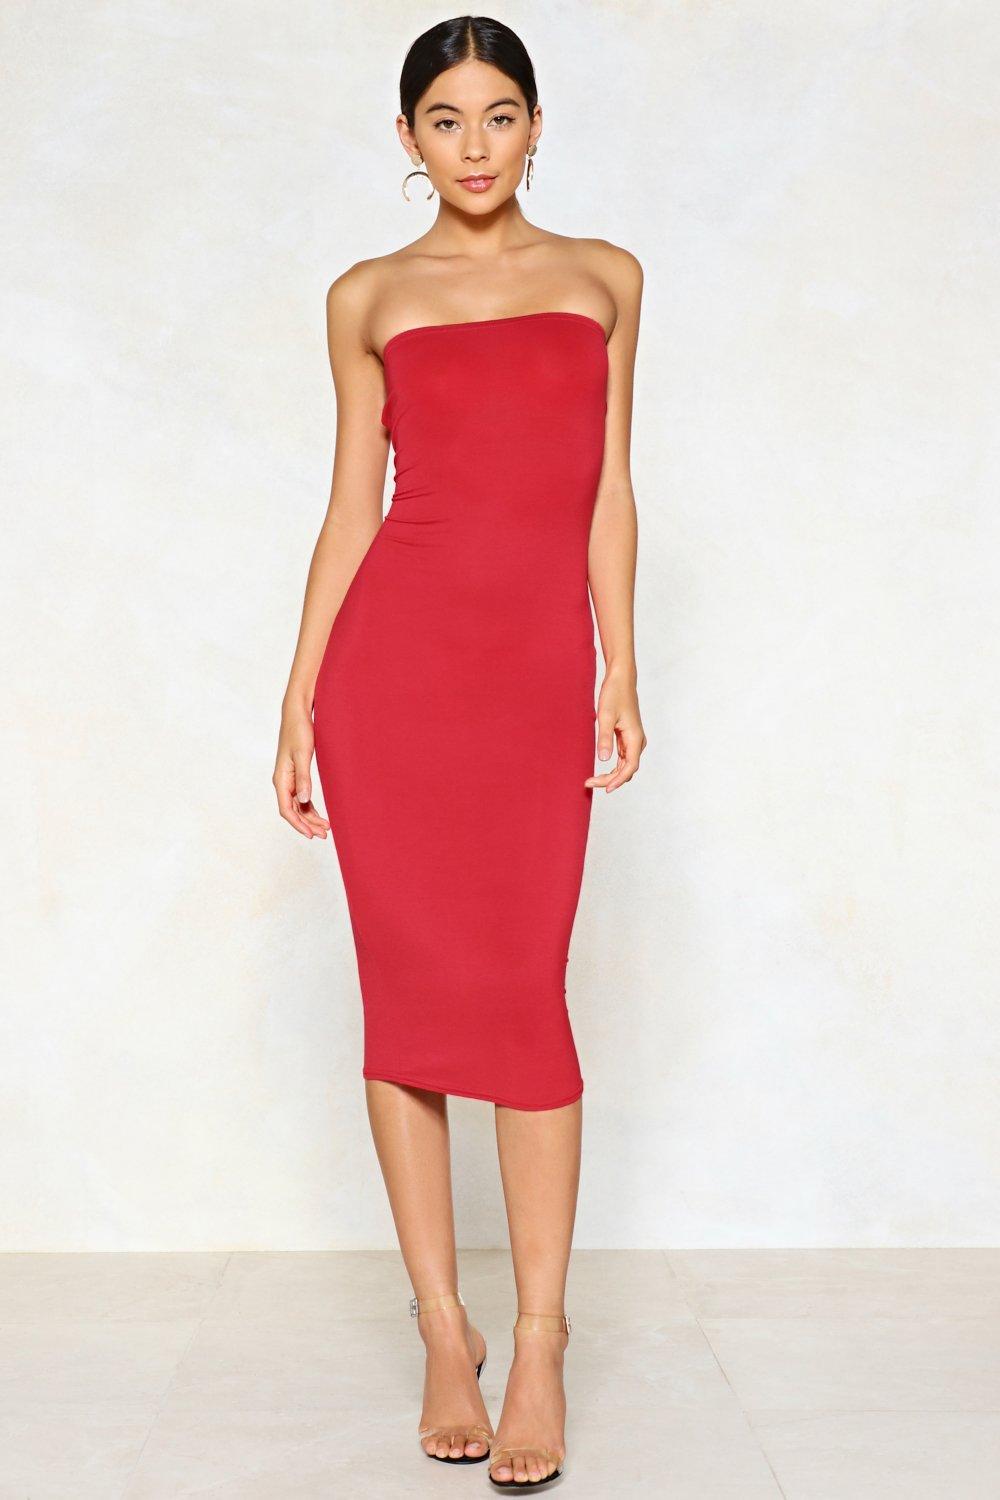 Simple as That Strapless Dress | Nasty Gal